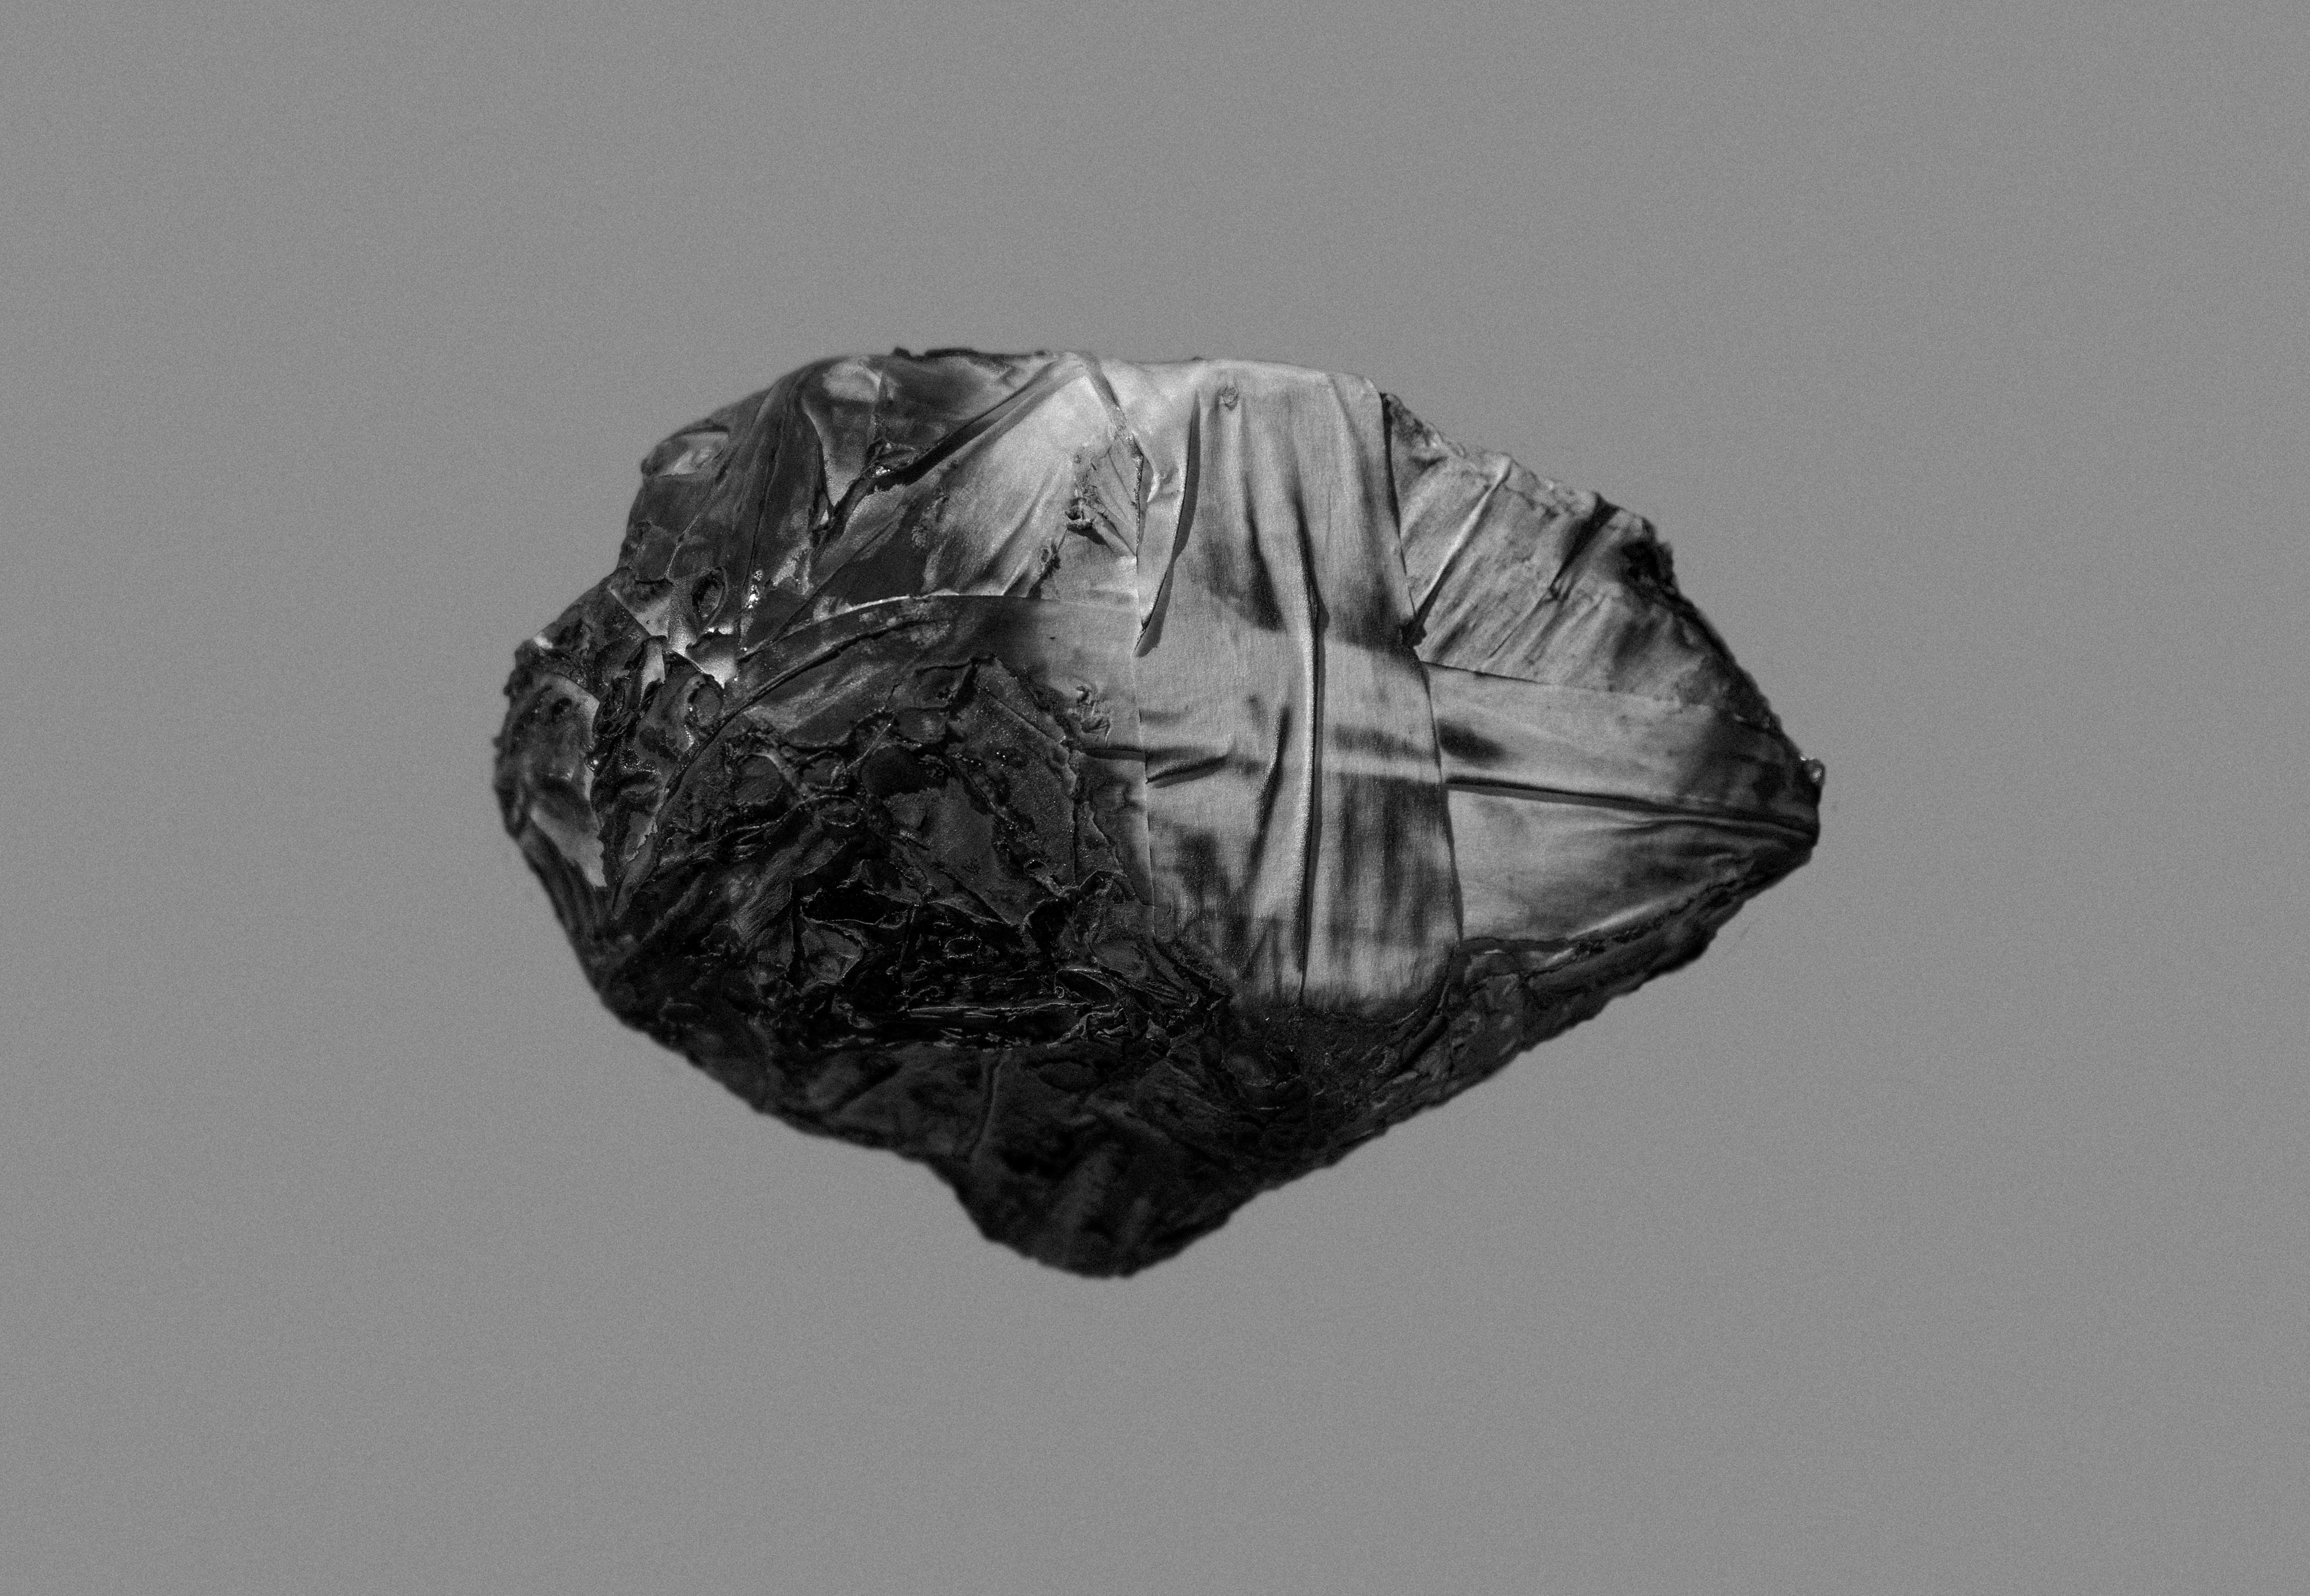 On Hansen Black and White Photograph - A rock cannot burnt to ashes. Abstract black and white photograph